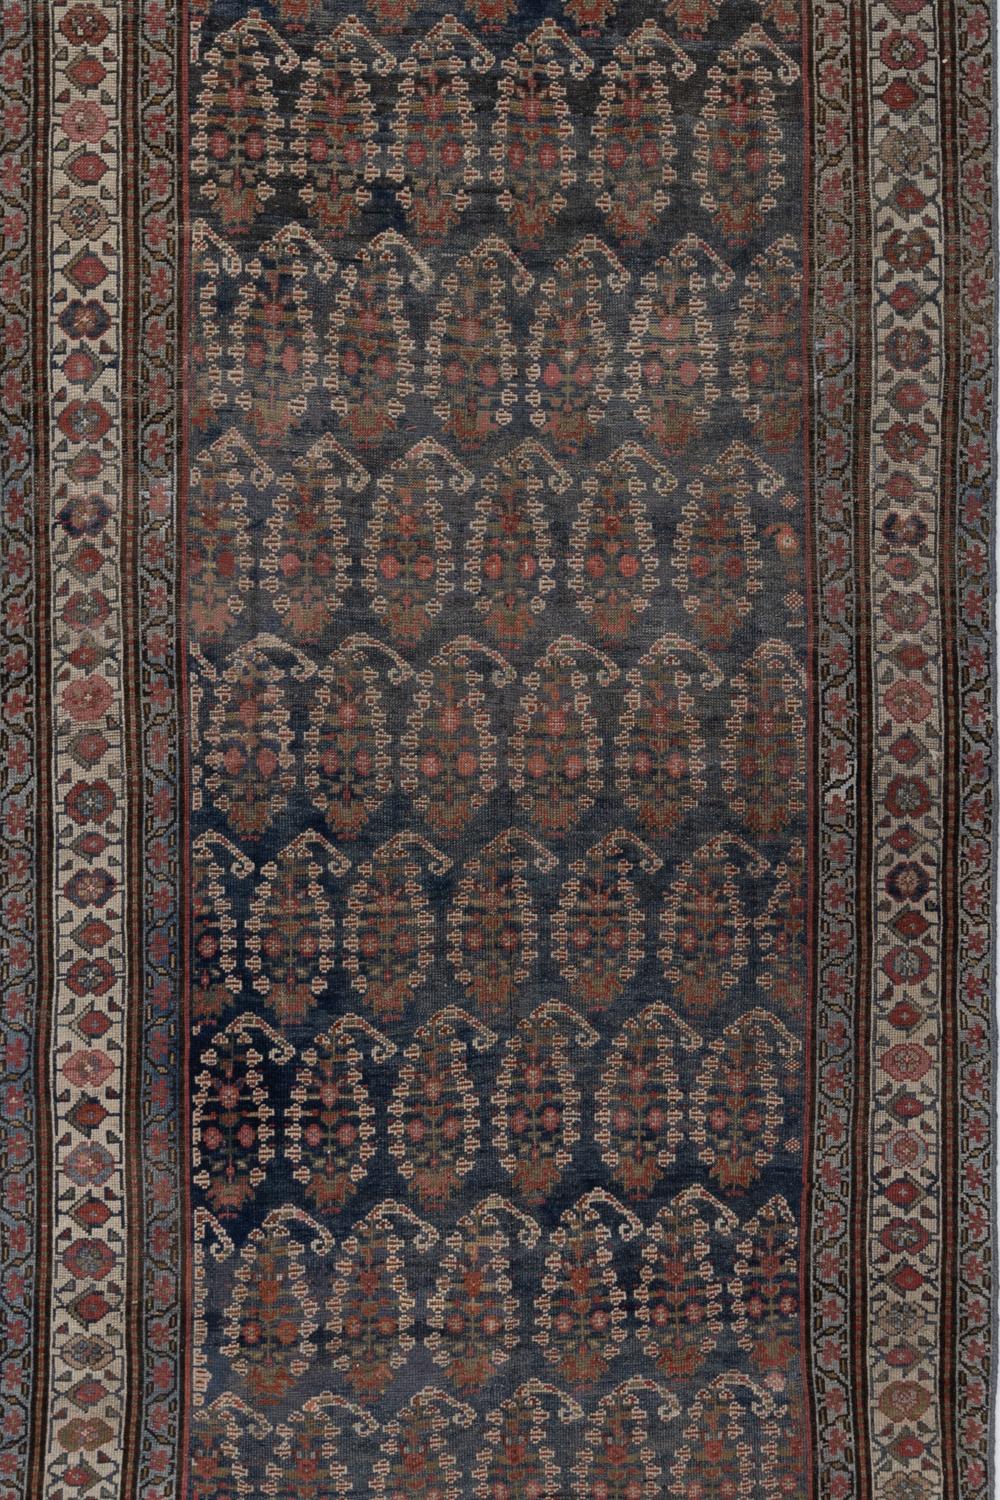 Circa: early 20th century
Pile: Low-medium
Wear Notes: 2
Stunning deep blue field Malayer with a sea of detailed boteh that consist of individual symbols themselves.

Wear Guide:
Vintage and antique rugs are by nature, pre-loved and may show